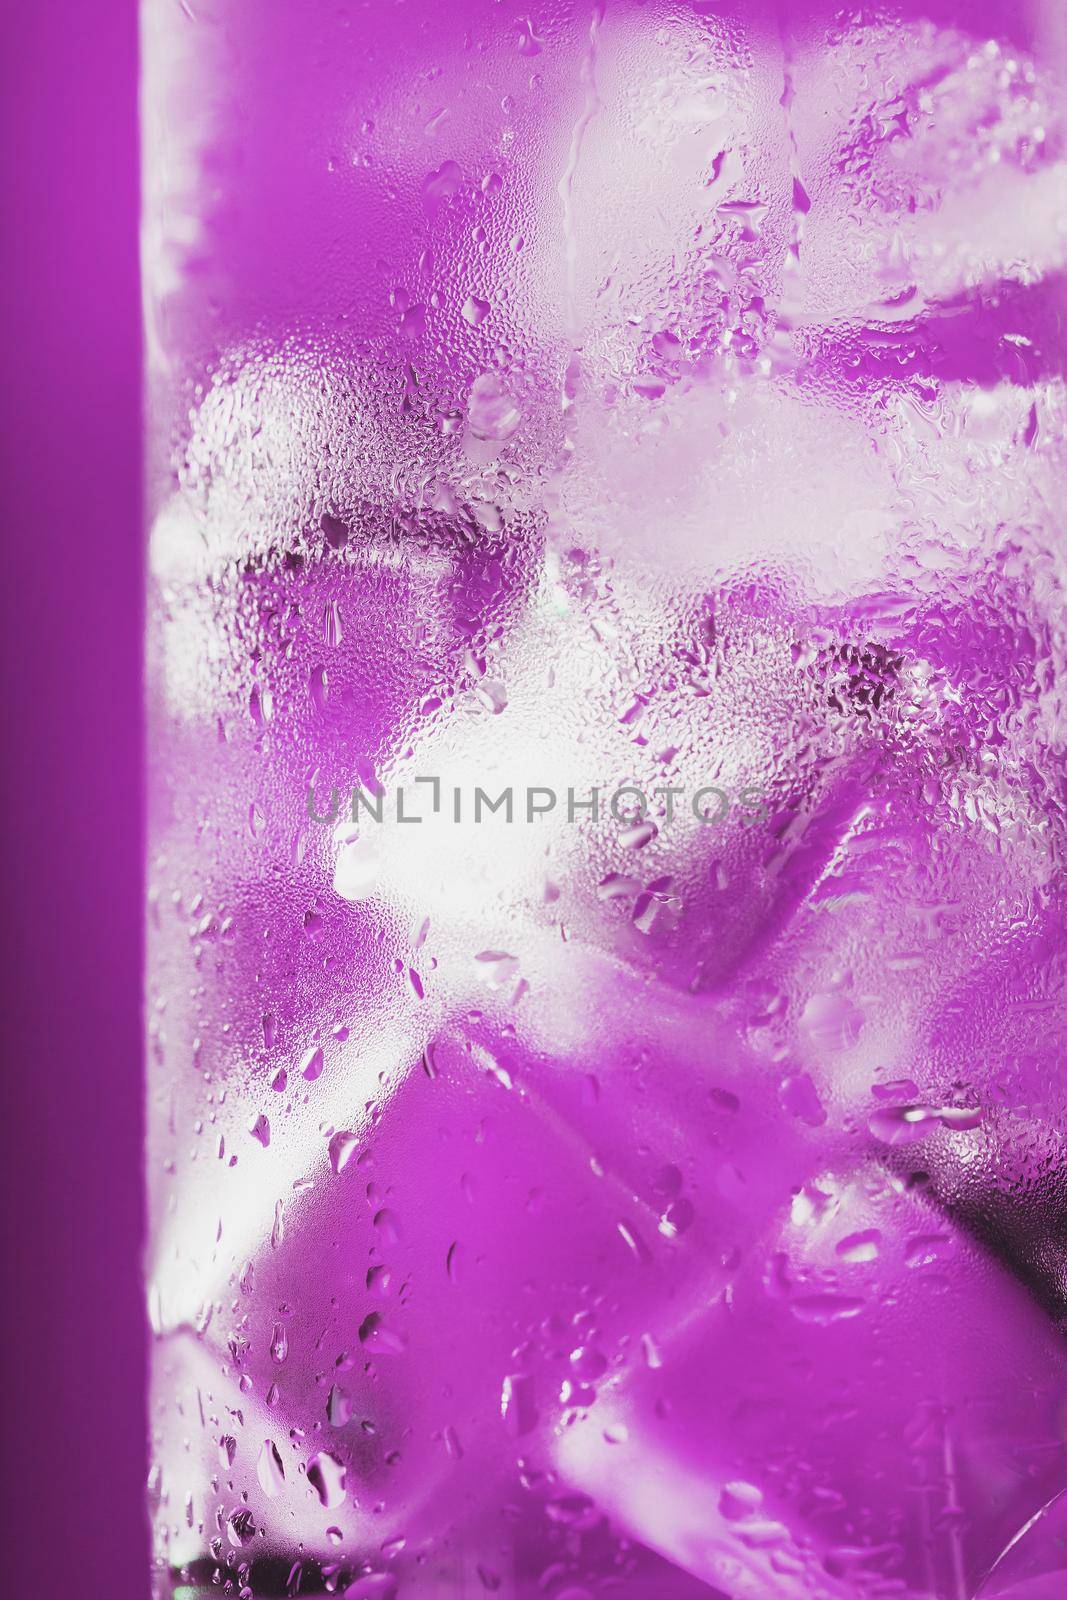 Ice cubes in a glass with refreshing ice water on a pink background. Close-up